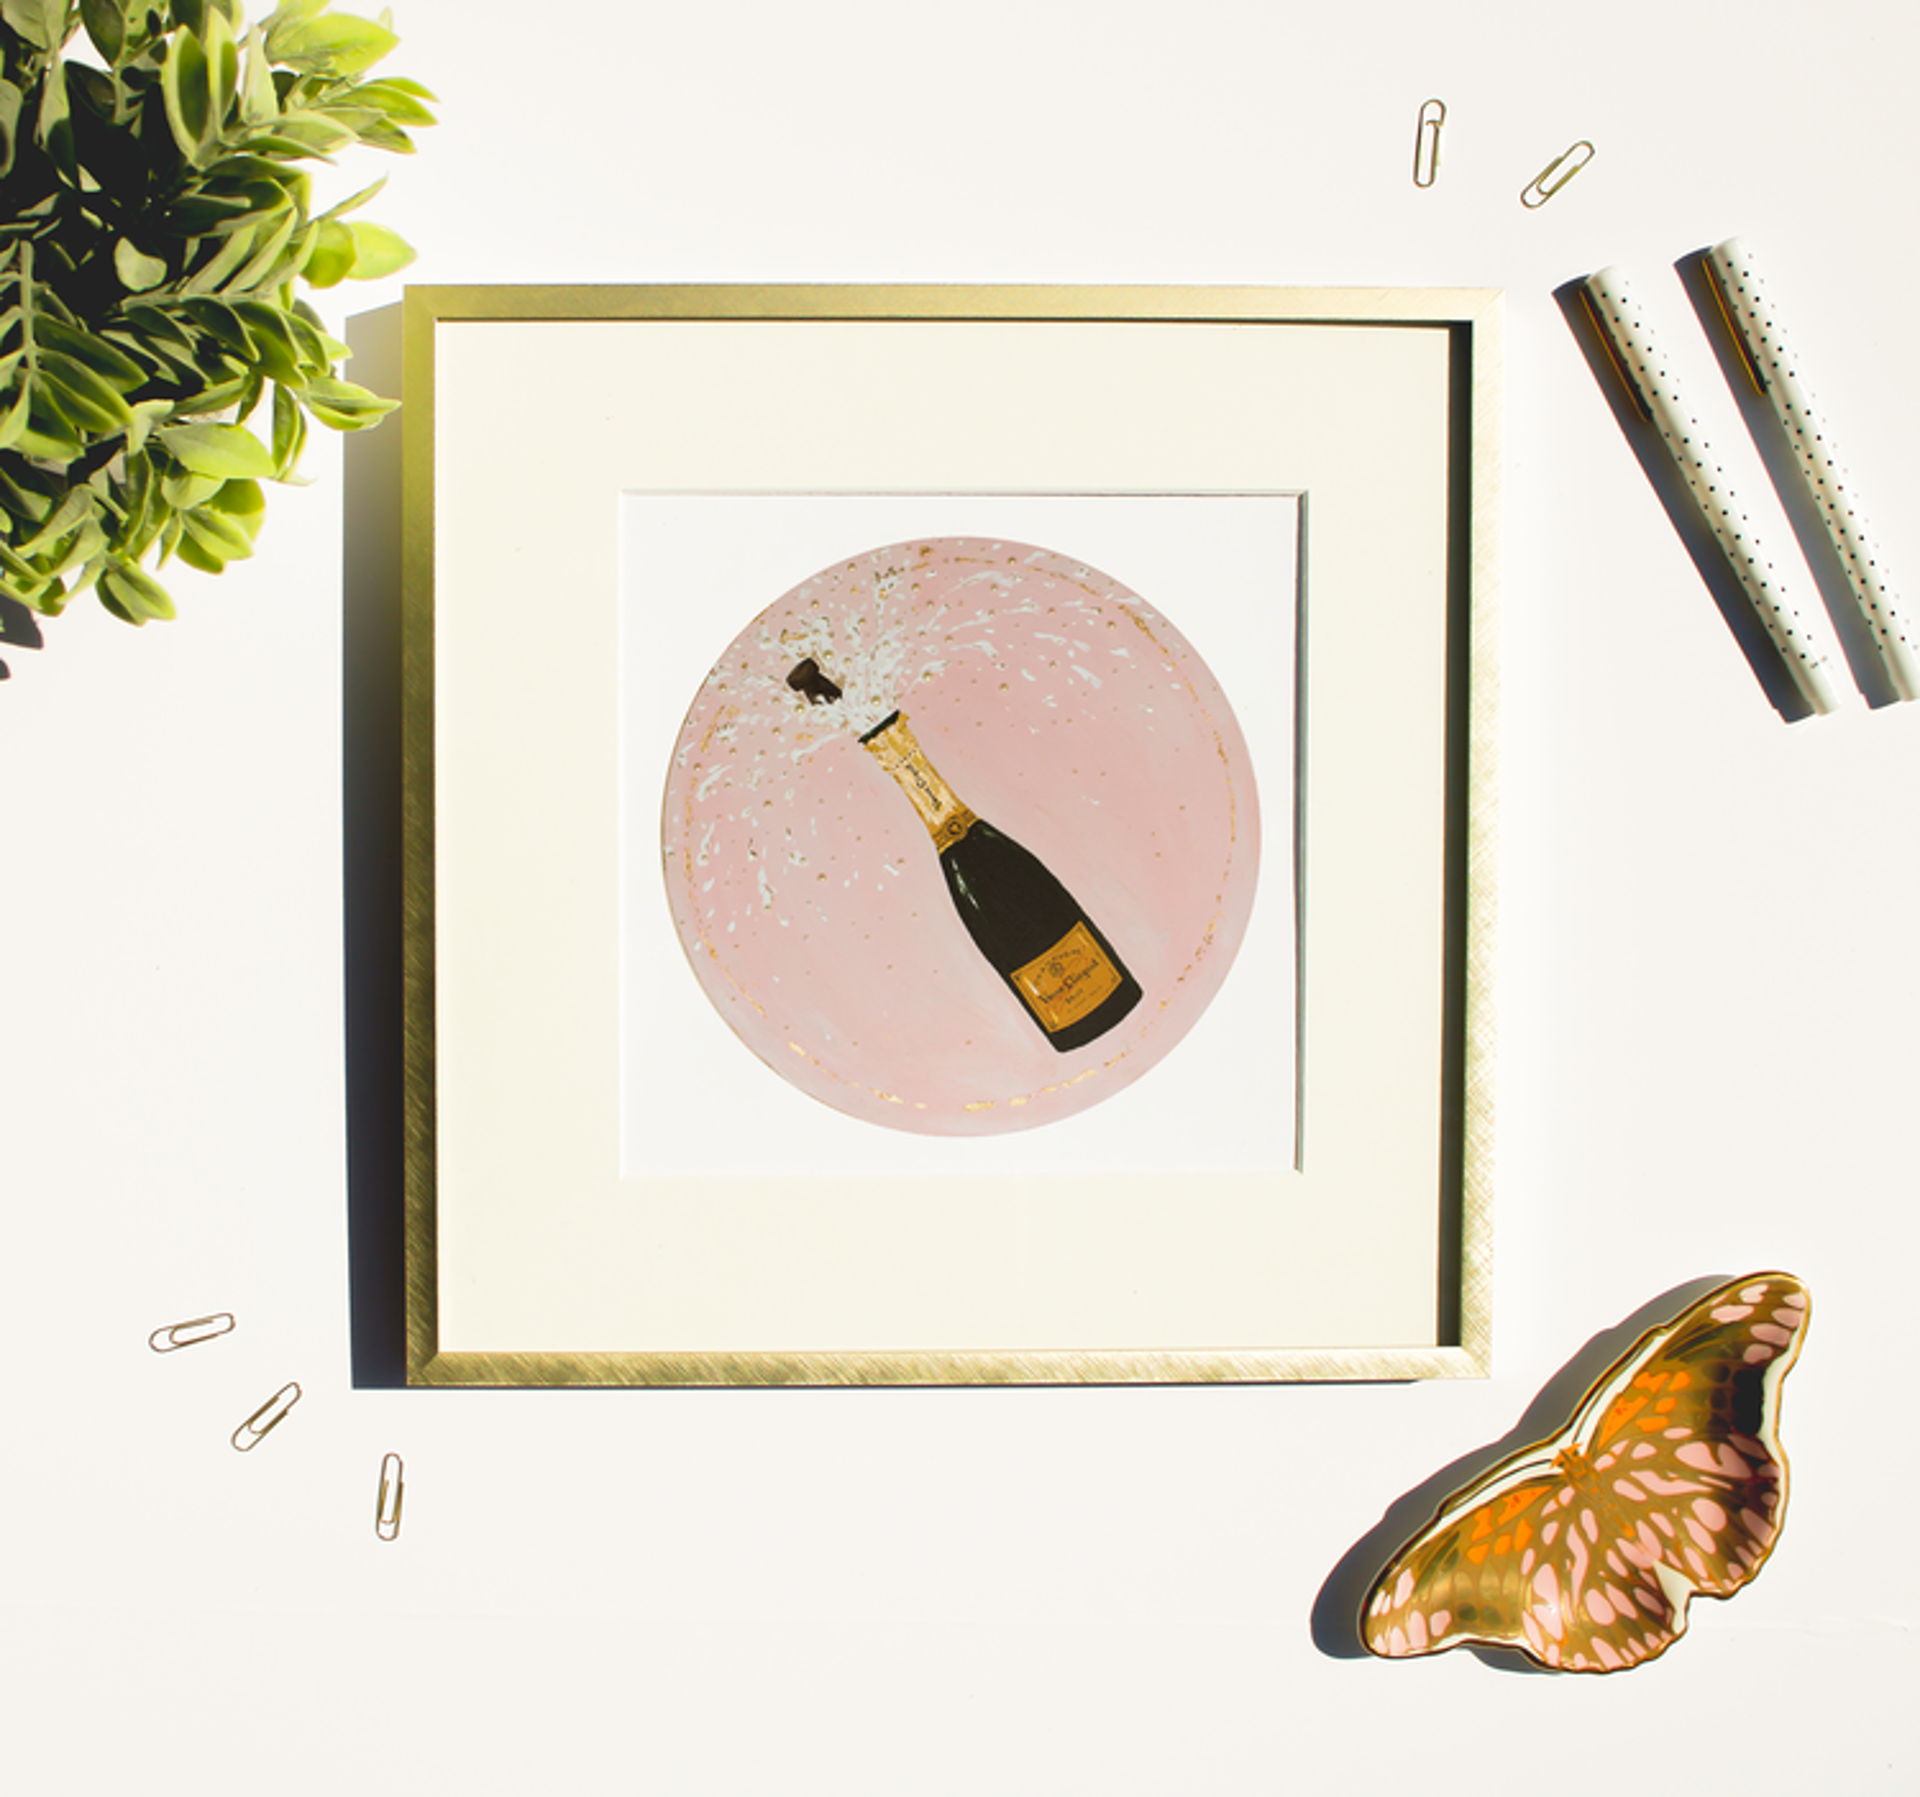 Veuve Clicquot in Pink Inv. # 1 by Cora Barhorst